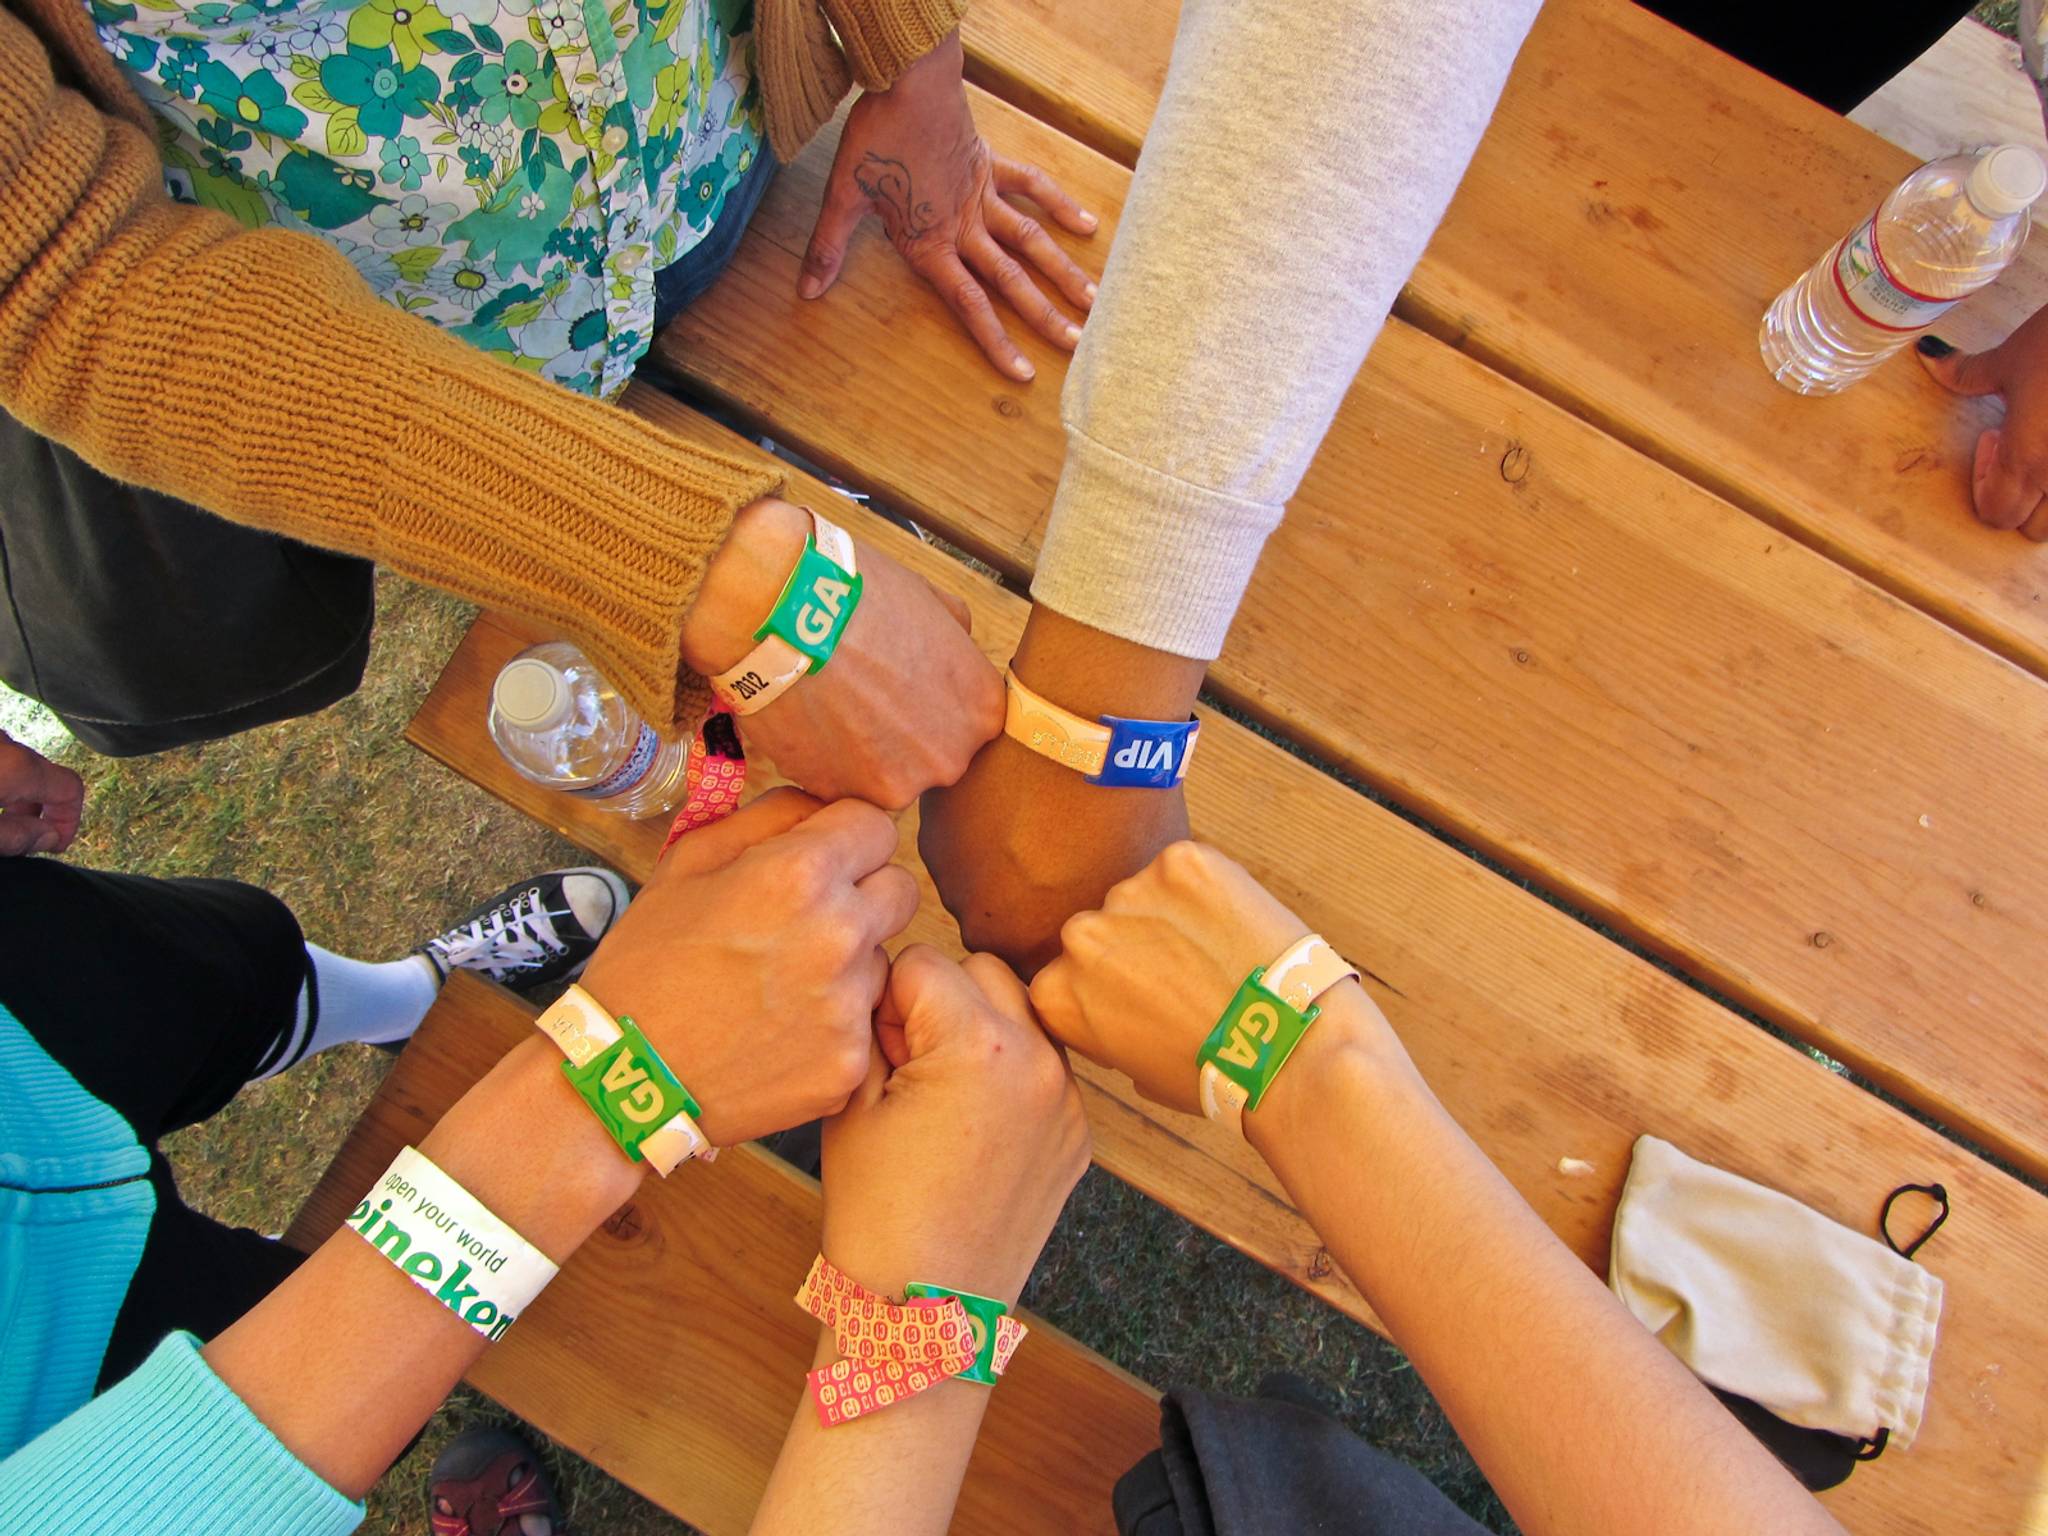 Eventbrite’s wristbands could replace tickets